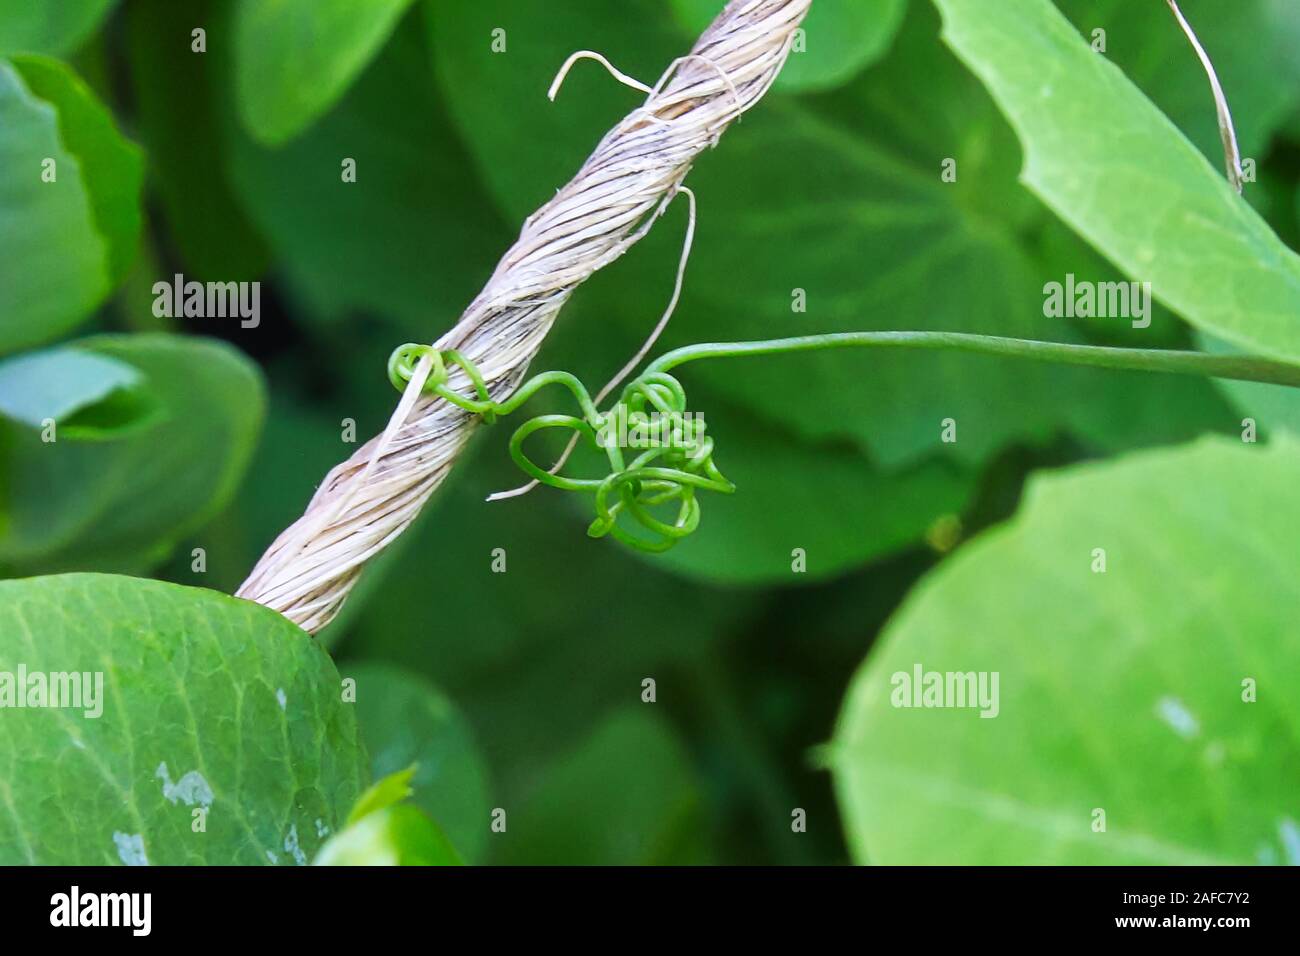 A pea vine curling around a string Stock Photo